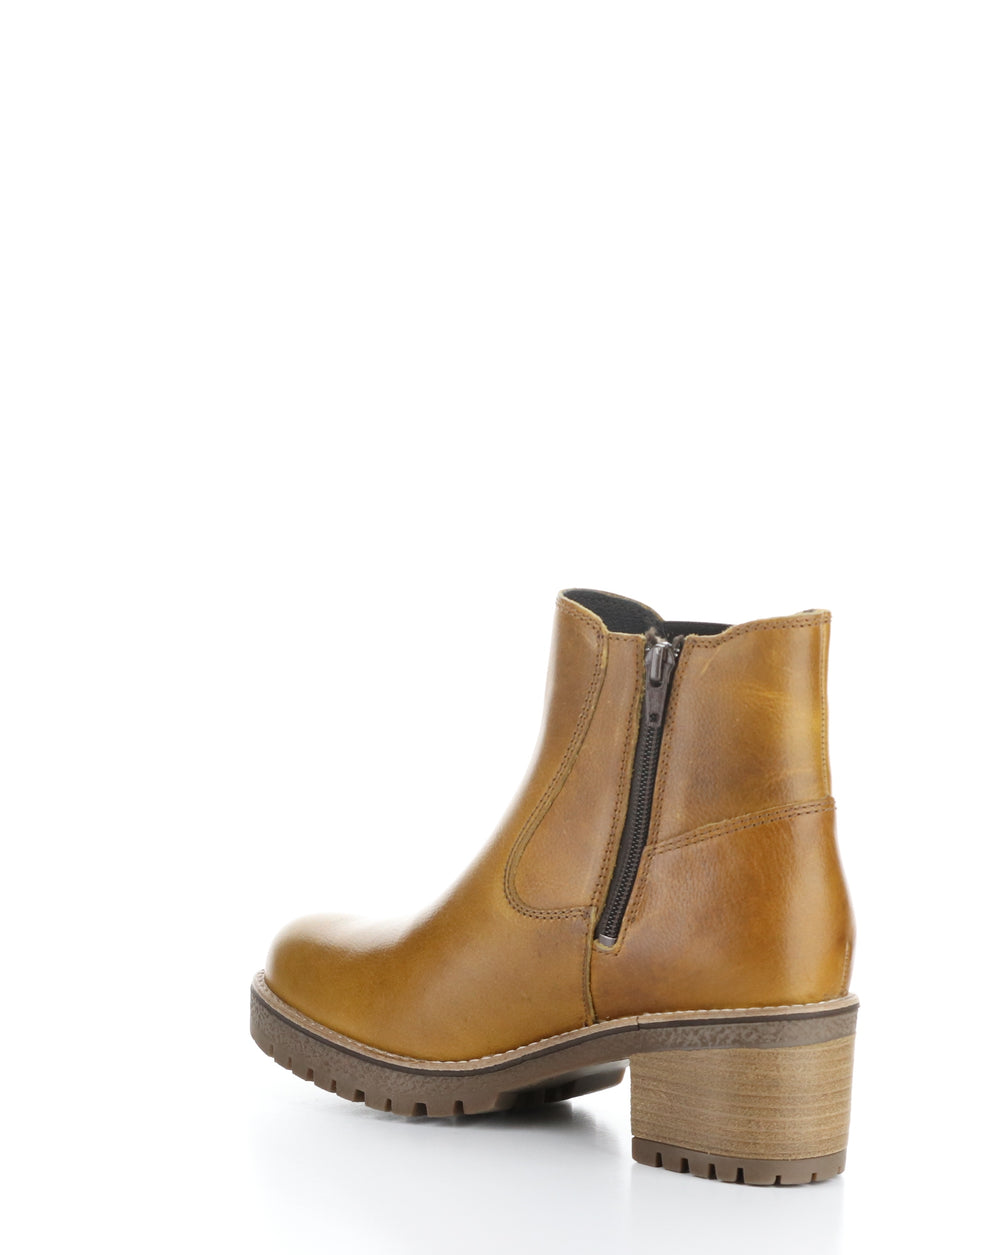 MERCY WOOL CAMEL Elasticated Boots